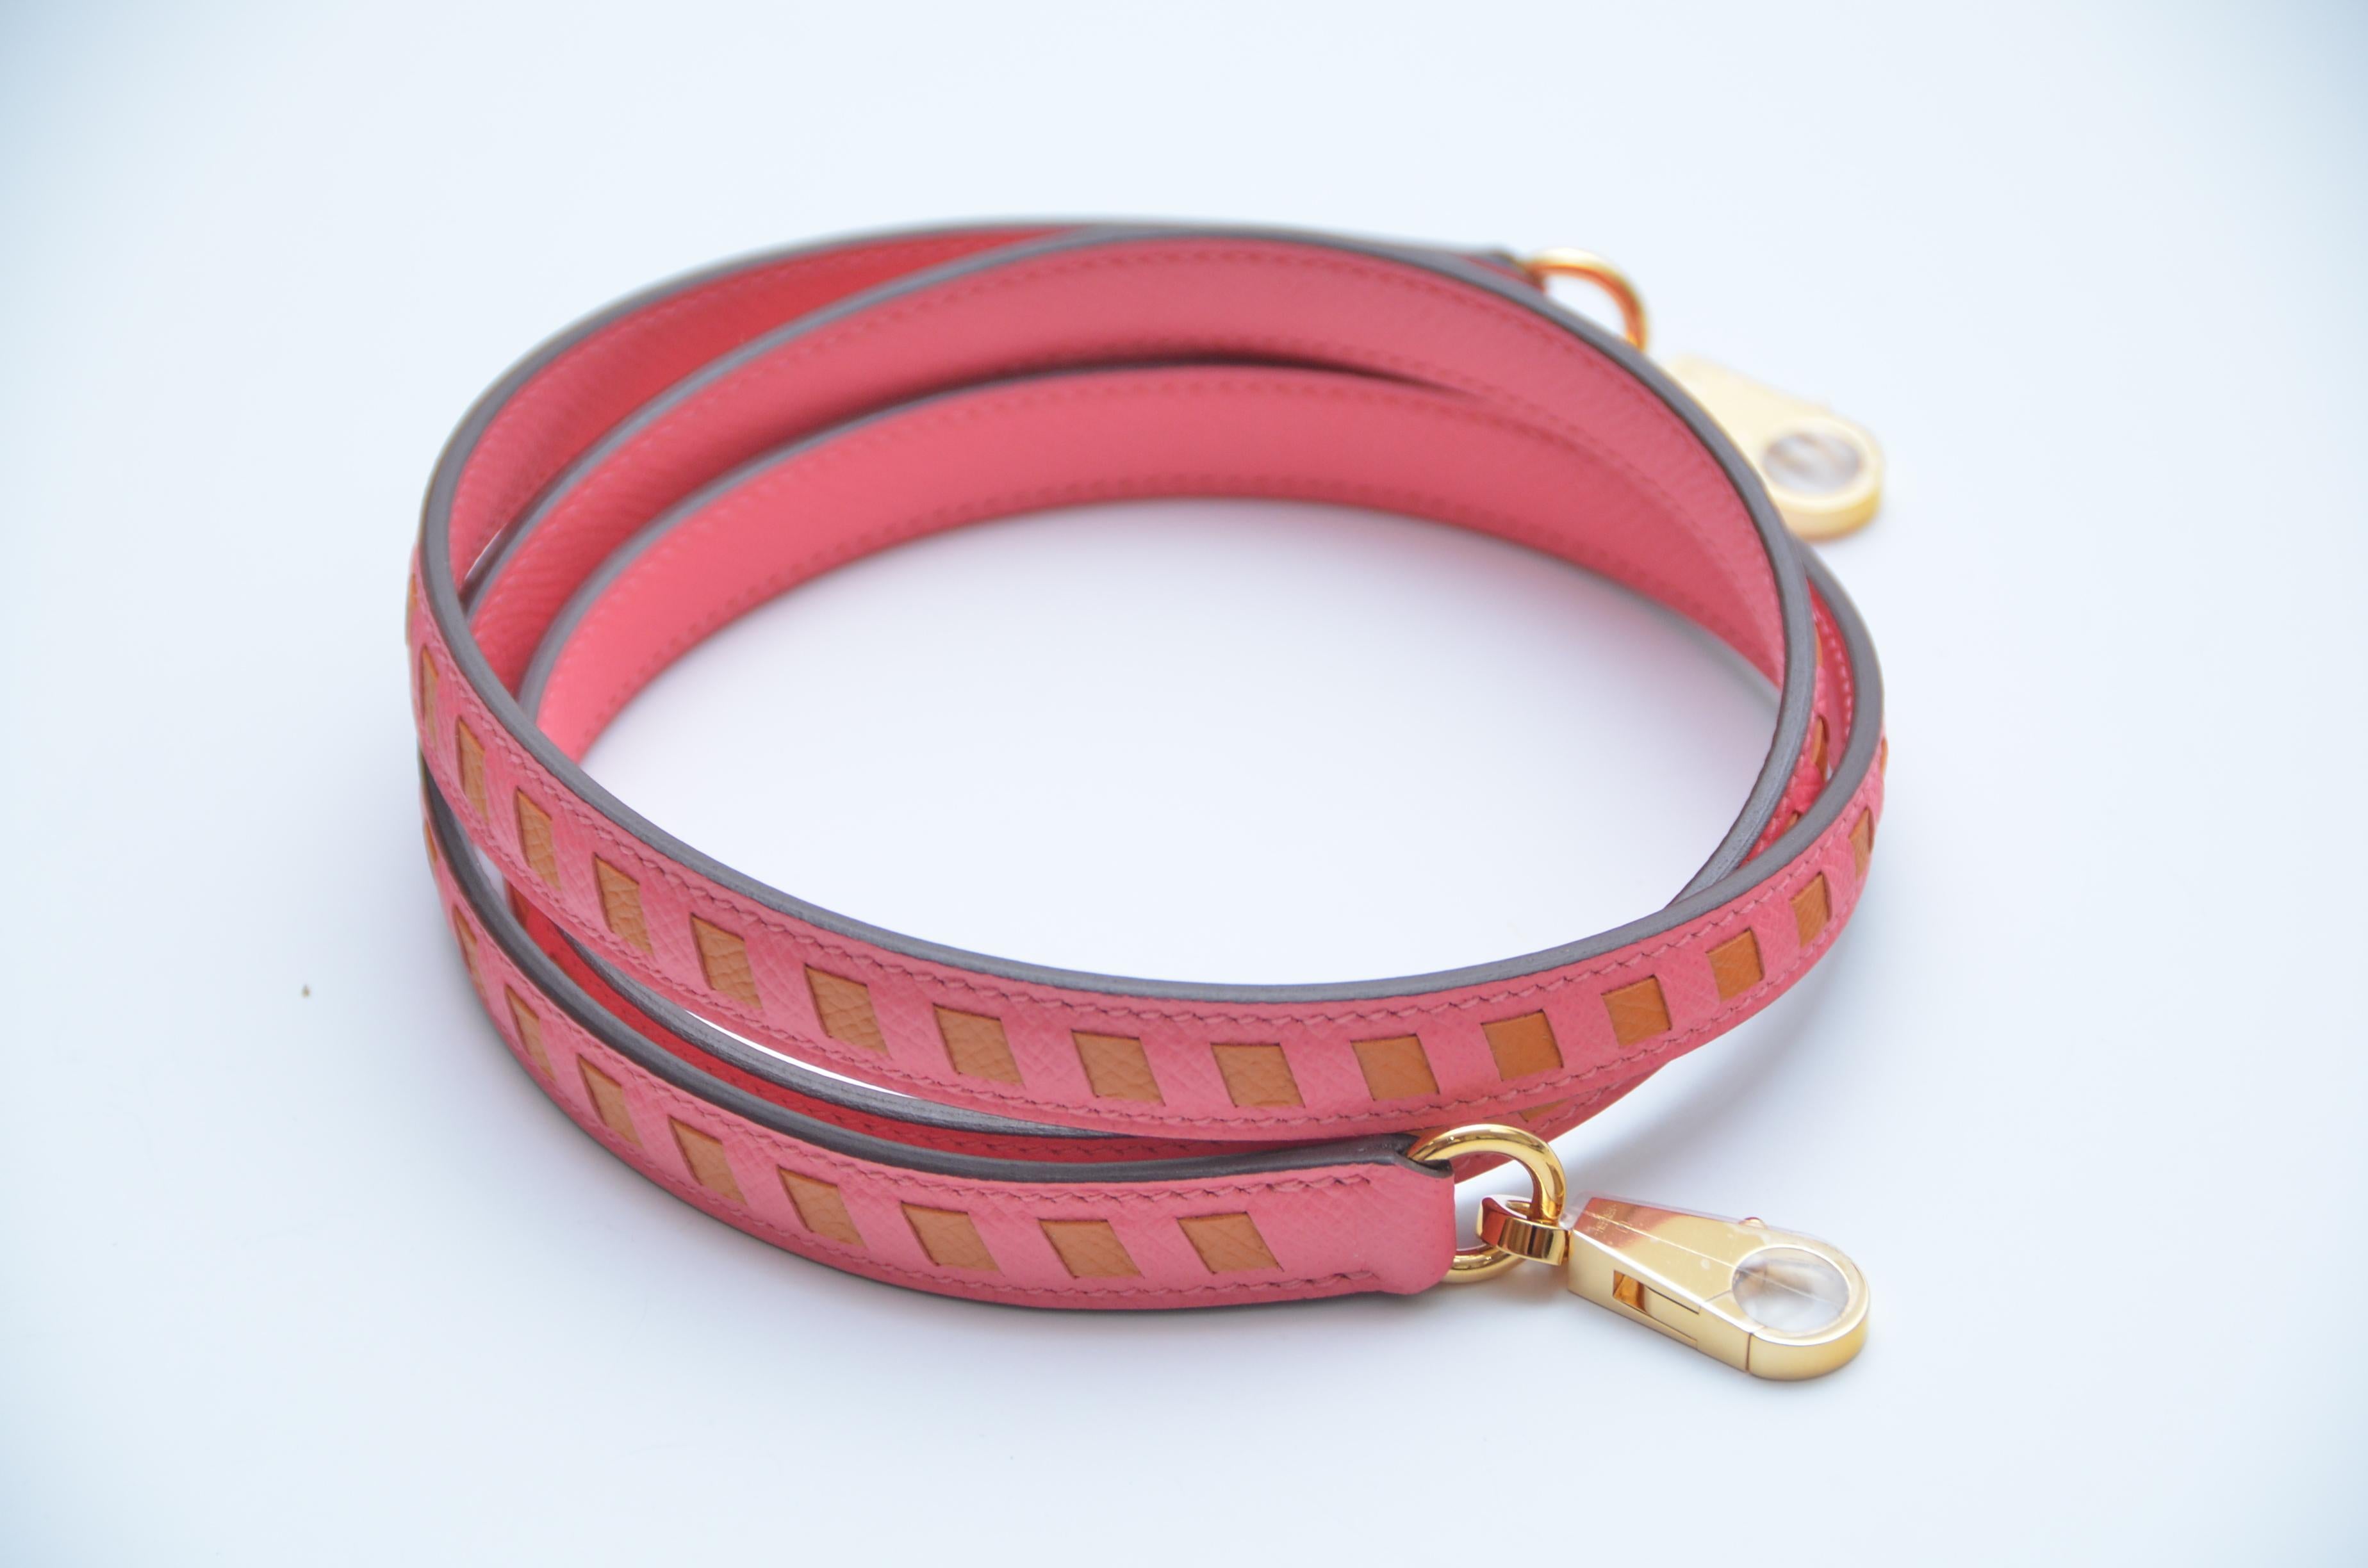 Hermes Limited Edition Handbag Strap 
Color is Rose Azalee X Abricot 
Brand new with dust bag and box.
Clear plastic on the hardware except on one side of the metal clip.approximate length 44” or 112 cm
Possibly lost during photographing.
Made in